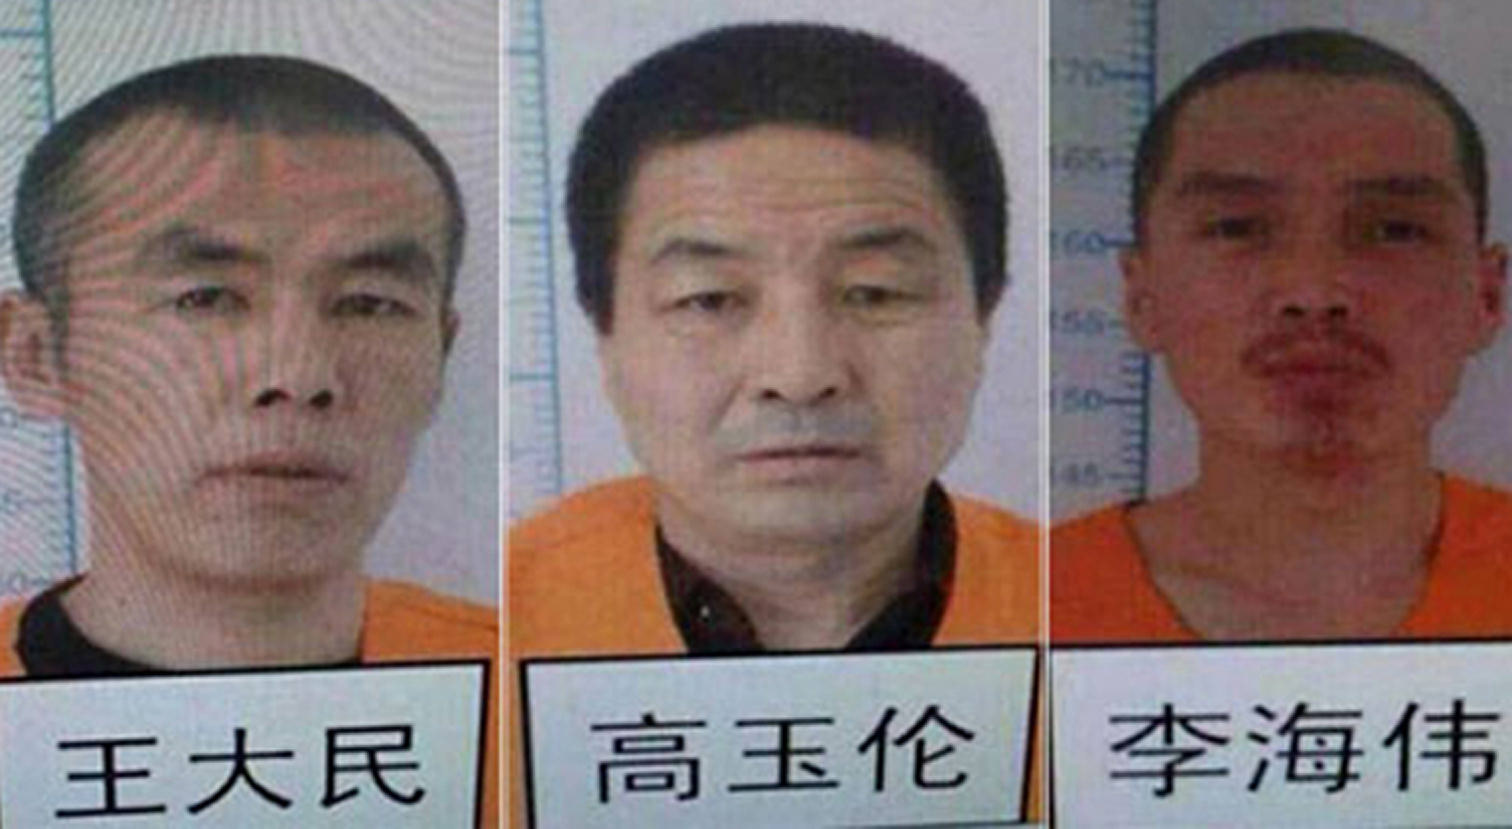 The three escaped prisoners (from left) Wang Damin, Gao Yulun and Li Haiwei. Photo: SCMP Pictures